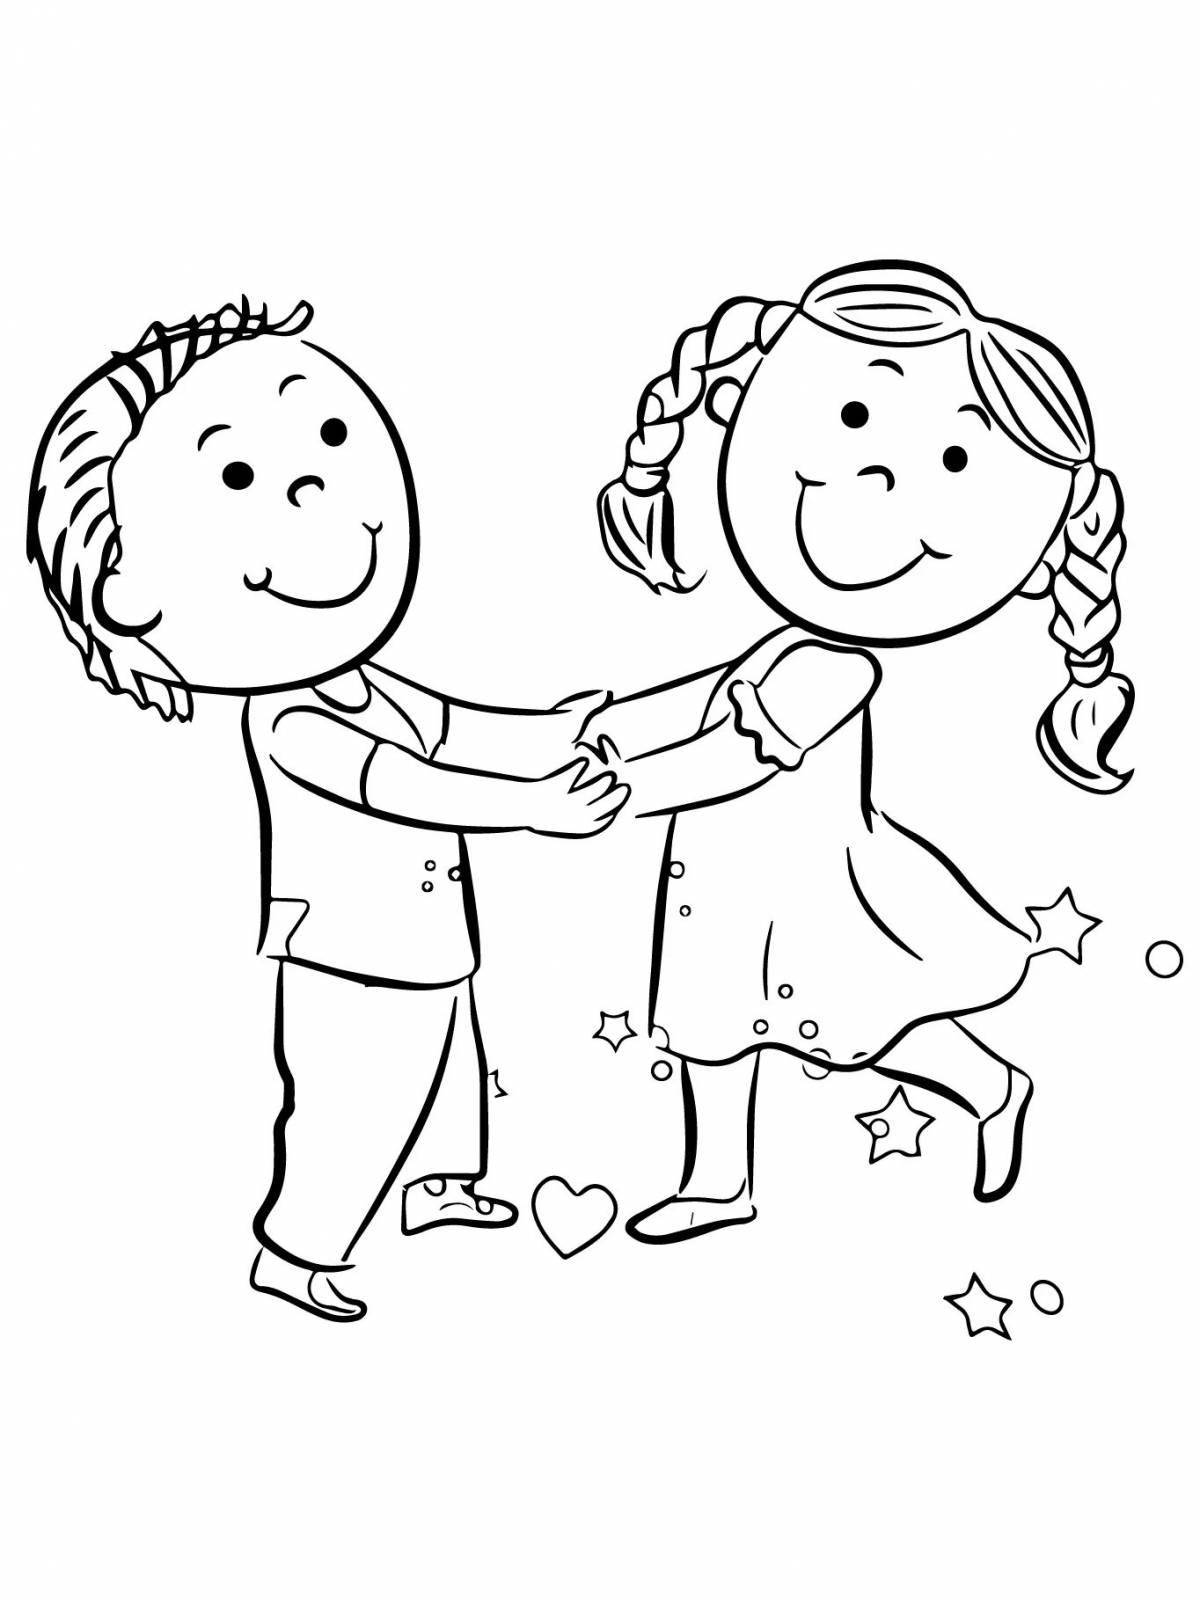 Colorful friendship coloring book for preschoolers